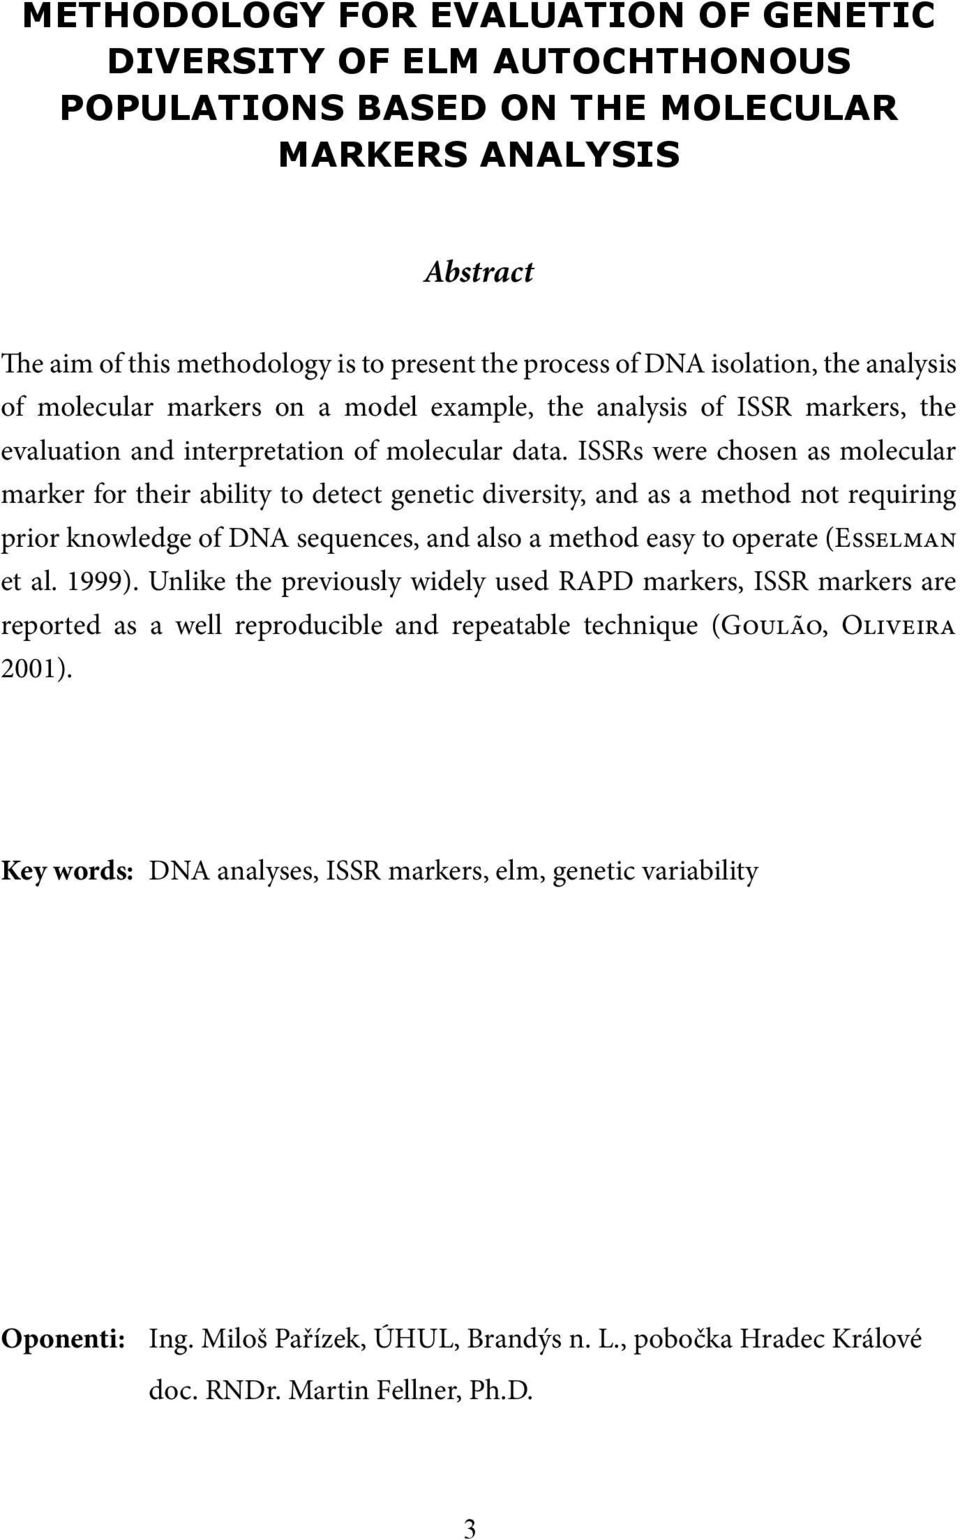 ISSRs were chosen as molecular marker for their ability to detect genetic diversity, and as a method not requiring prior knowledge of DNA sequences, and also a method easy to operate (Esselman et al.